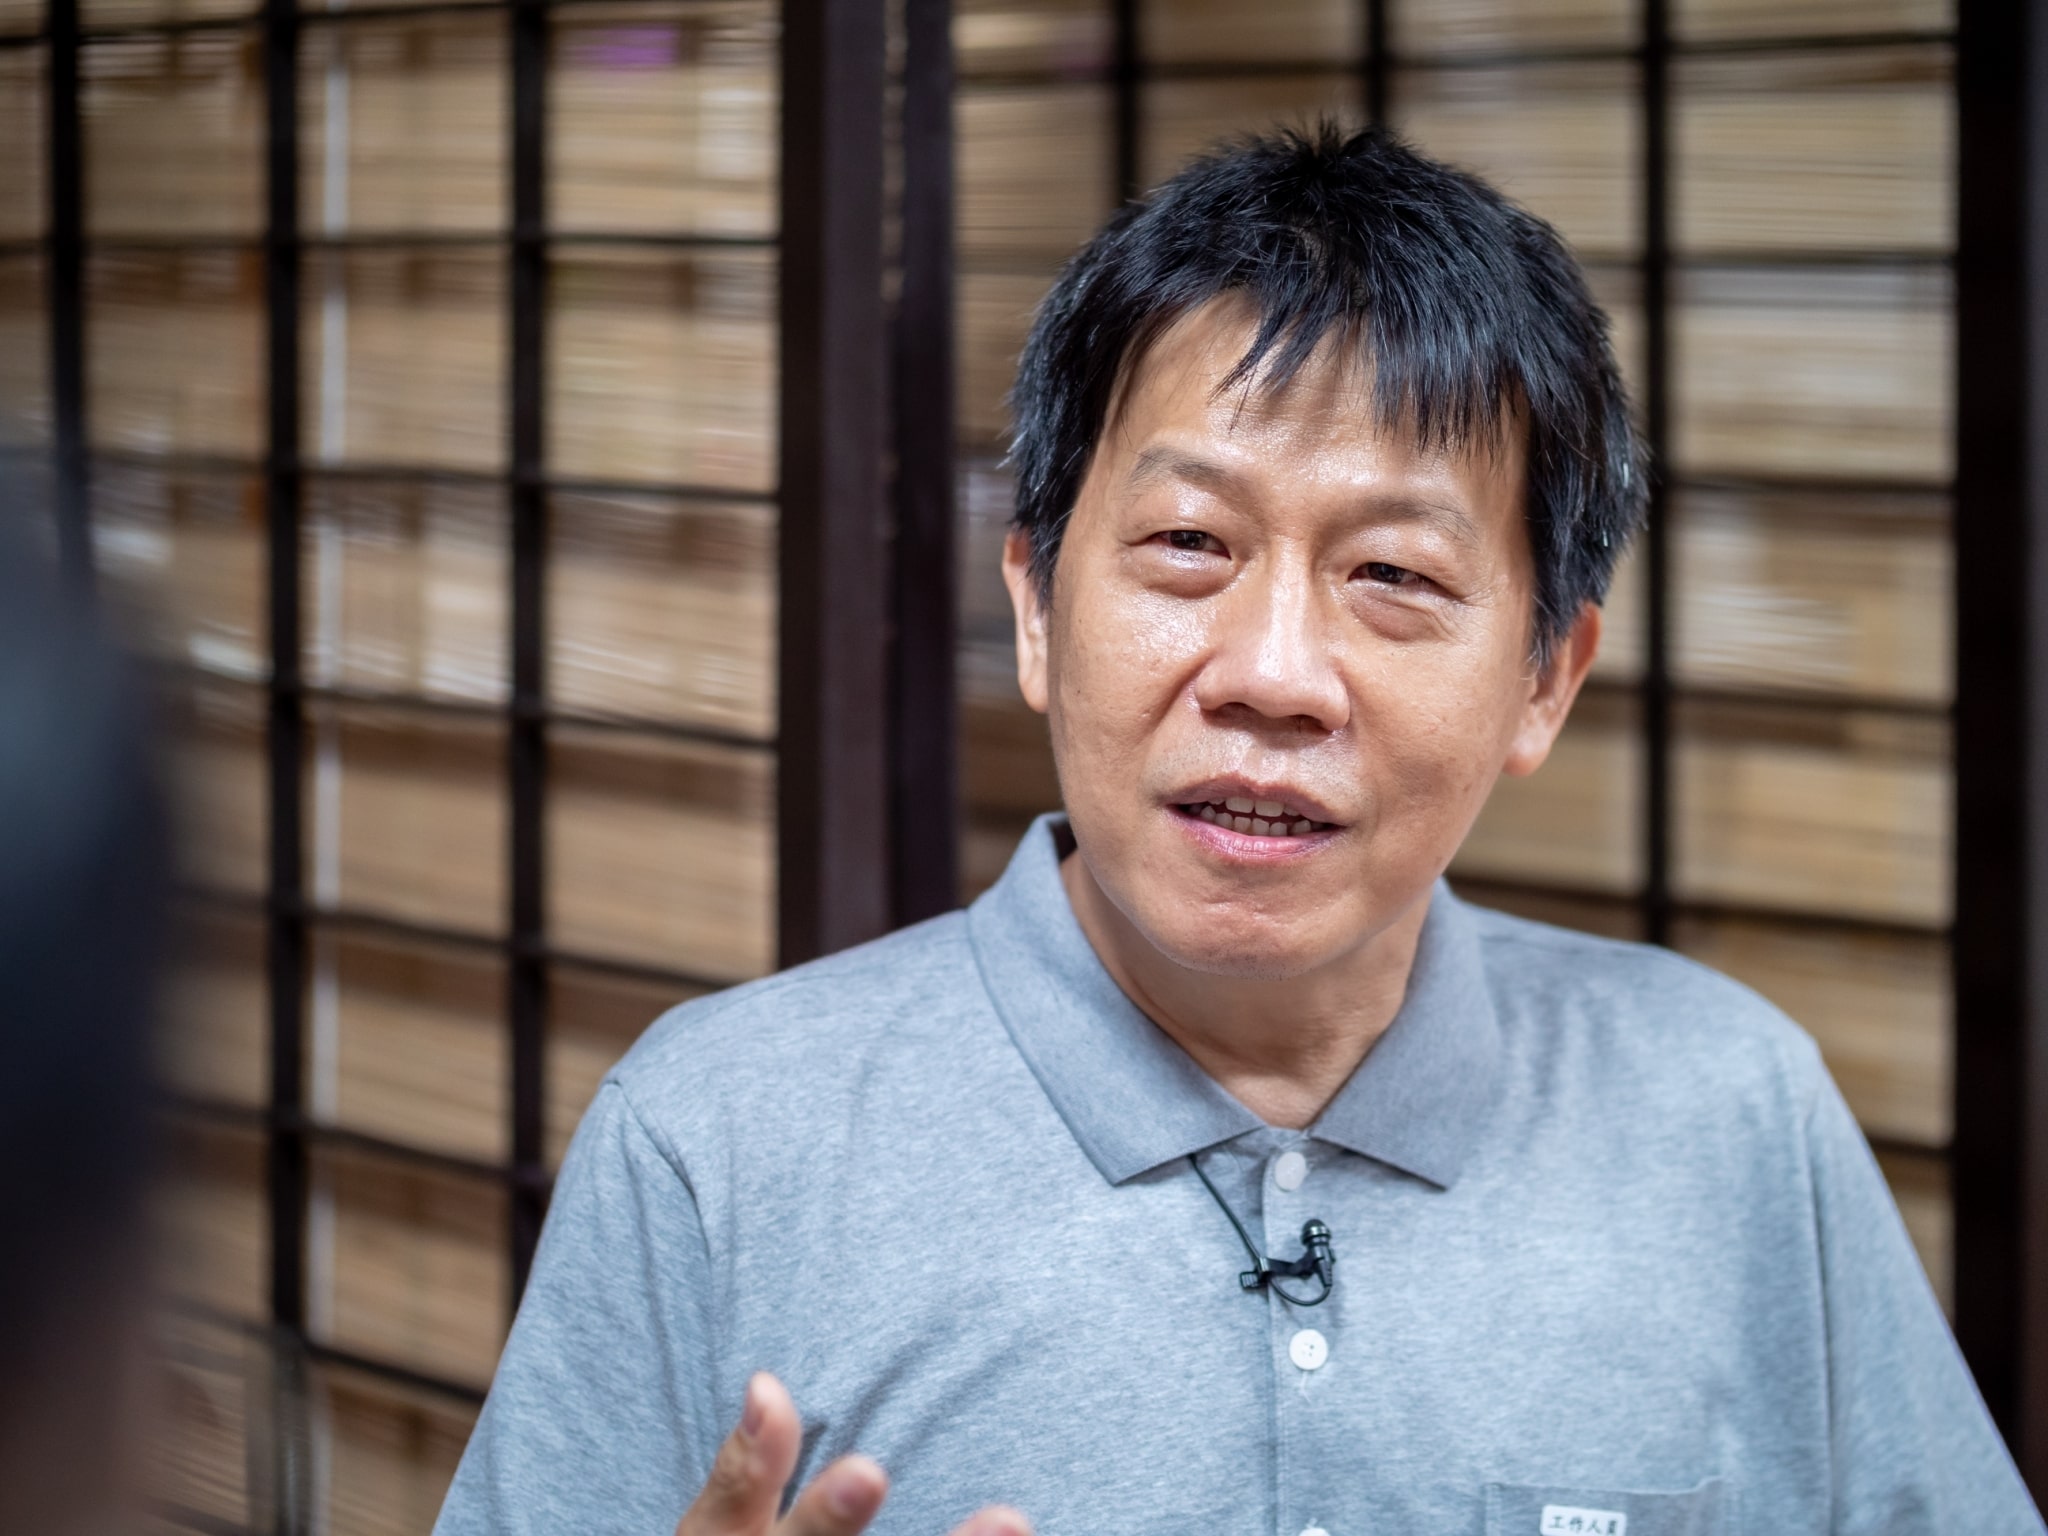 “I used to be very cynical and selfish. But through Tzu Chi, I have learned to be happy. I have also found true friendships here because the people who come here have pure intentions in helping others,” says volunteer Ronald Lee.【Photo by Daniel Lazar】